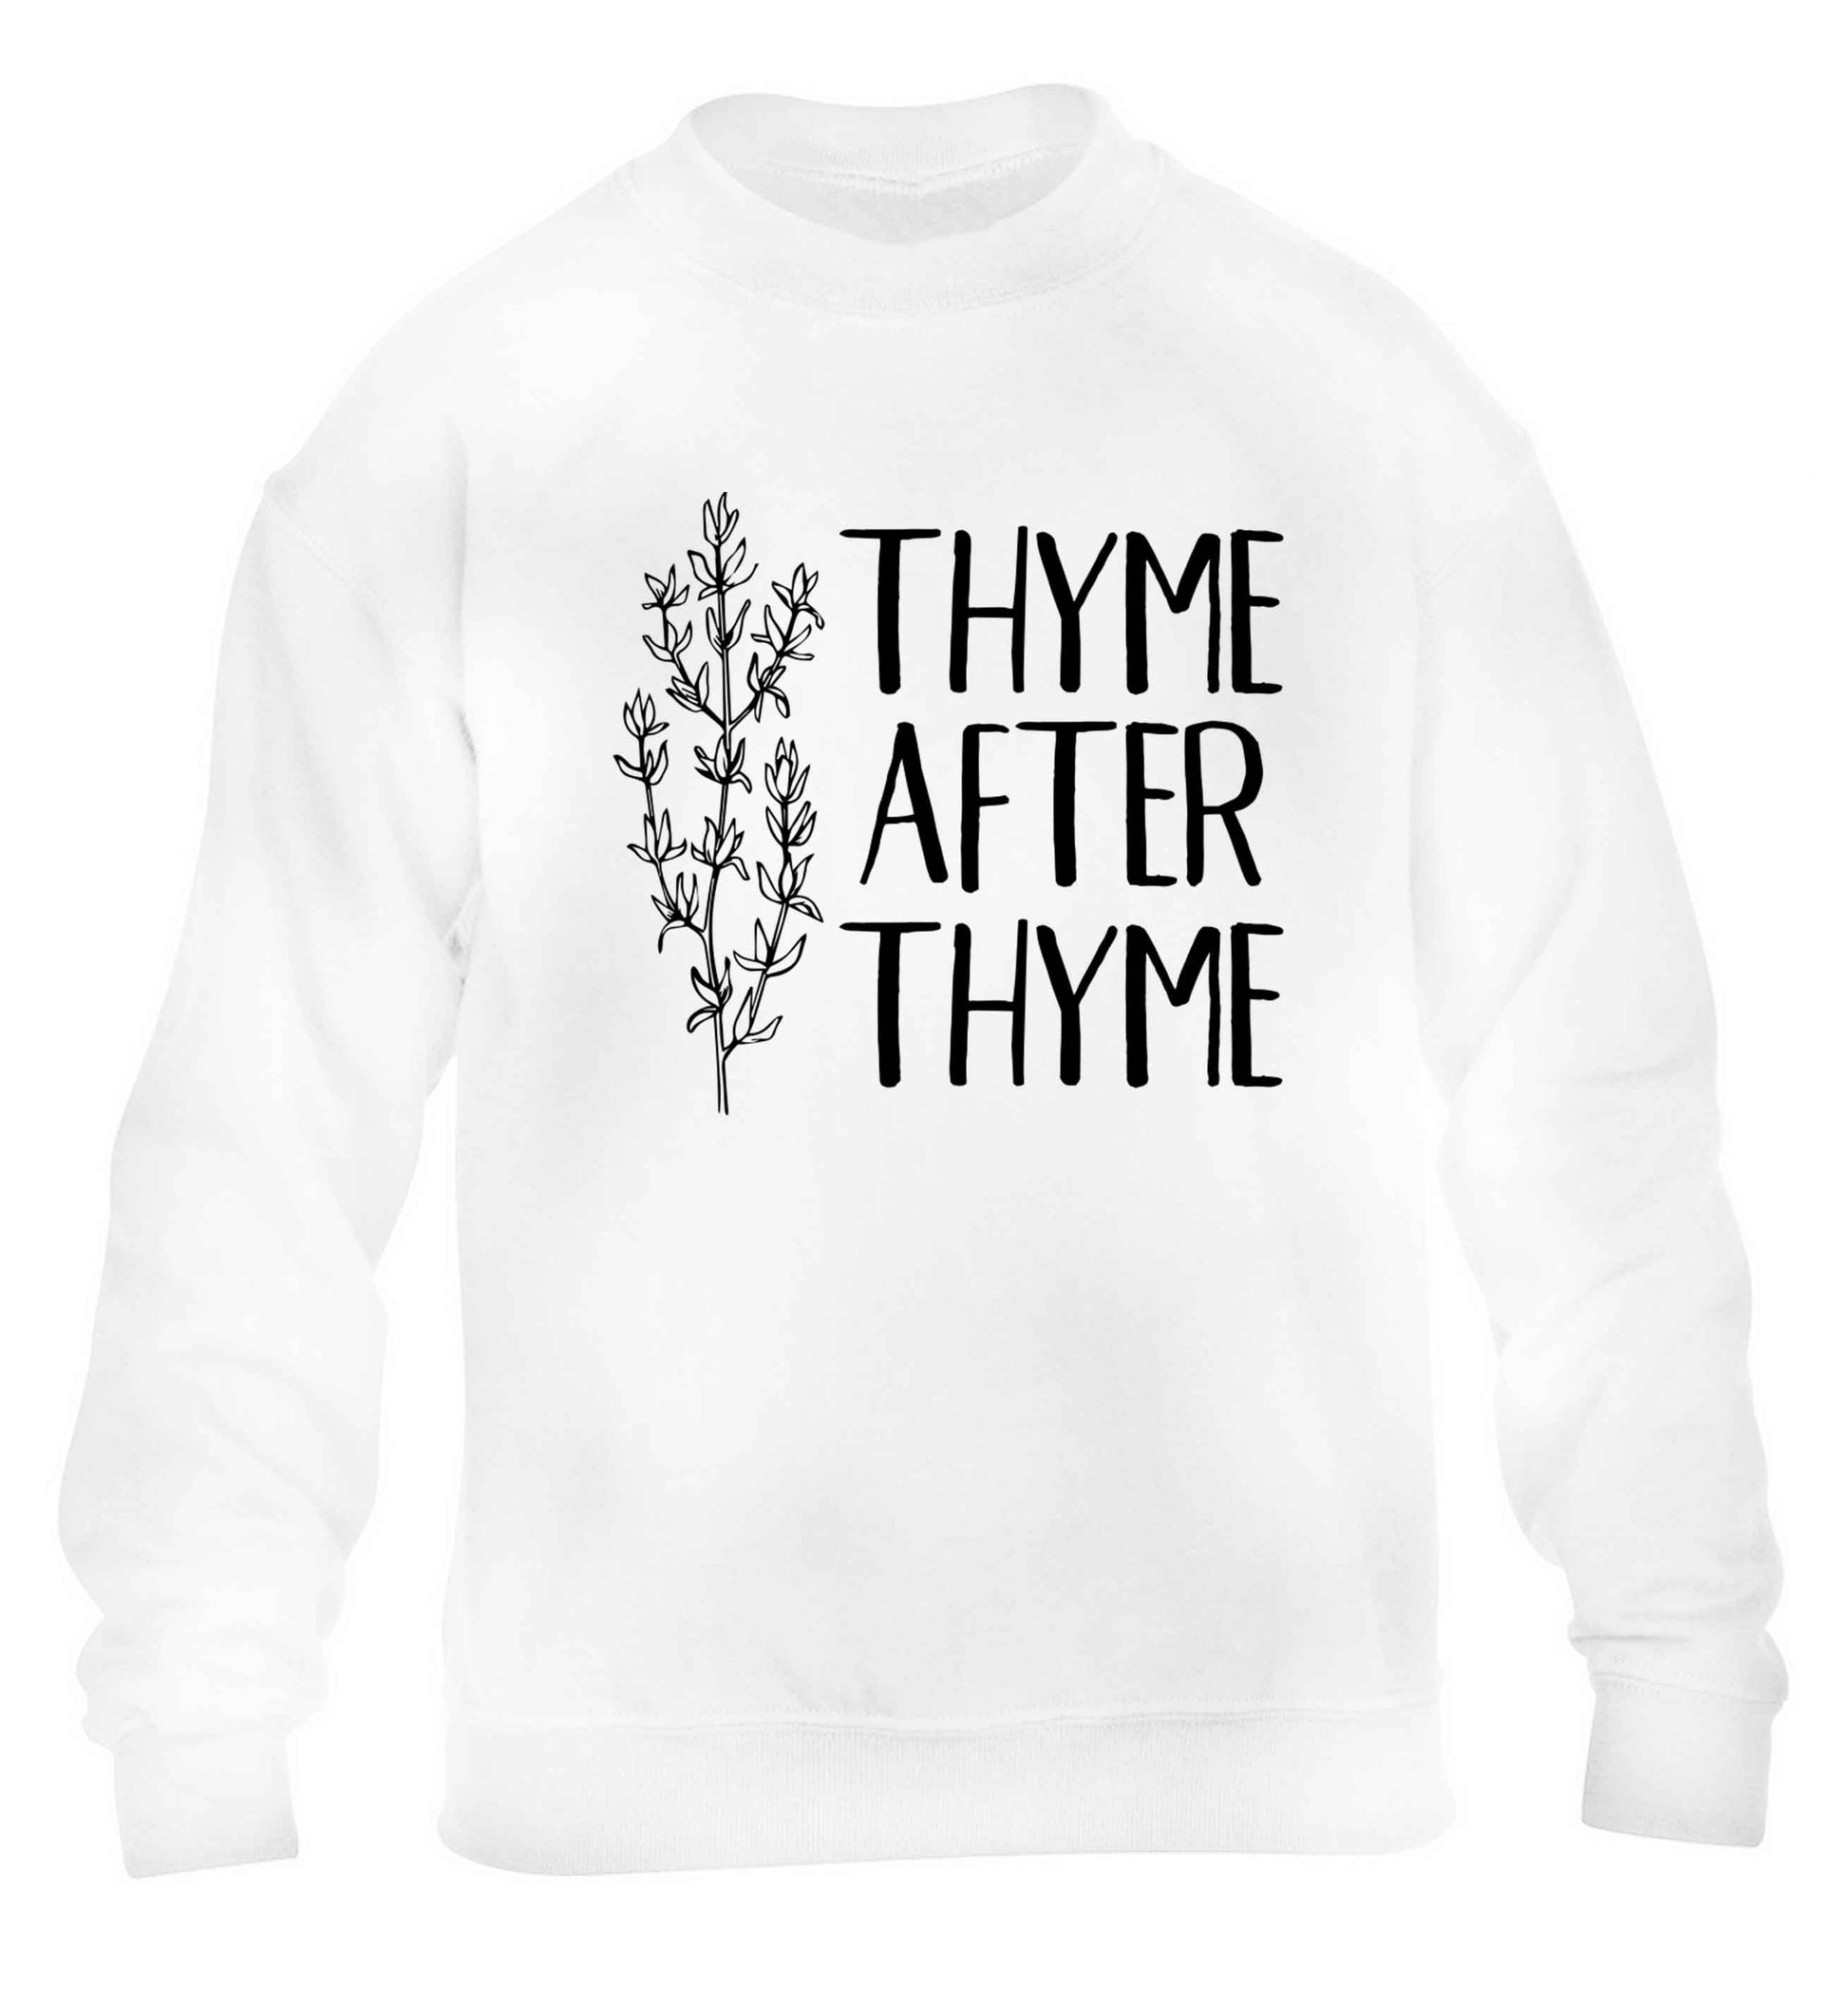 Thyme after thyme children's white sweater 12-13 Years